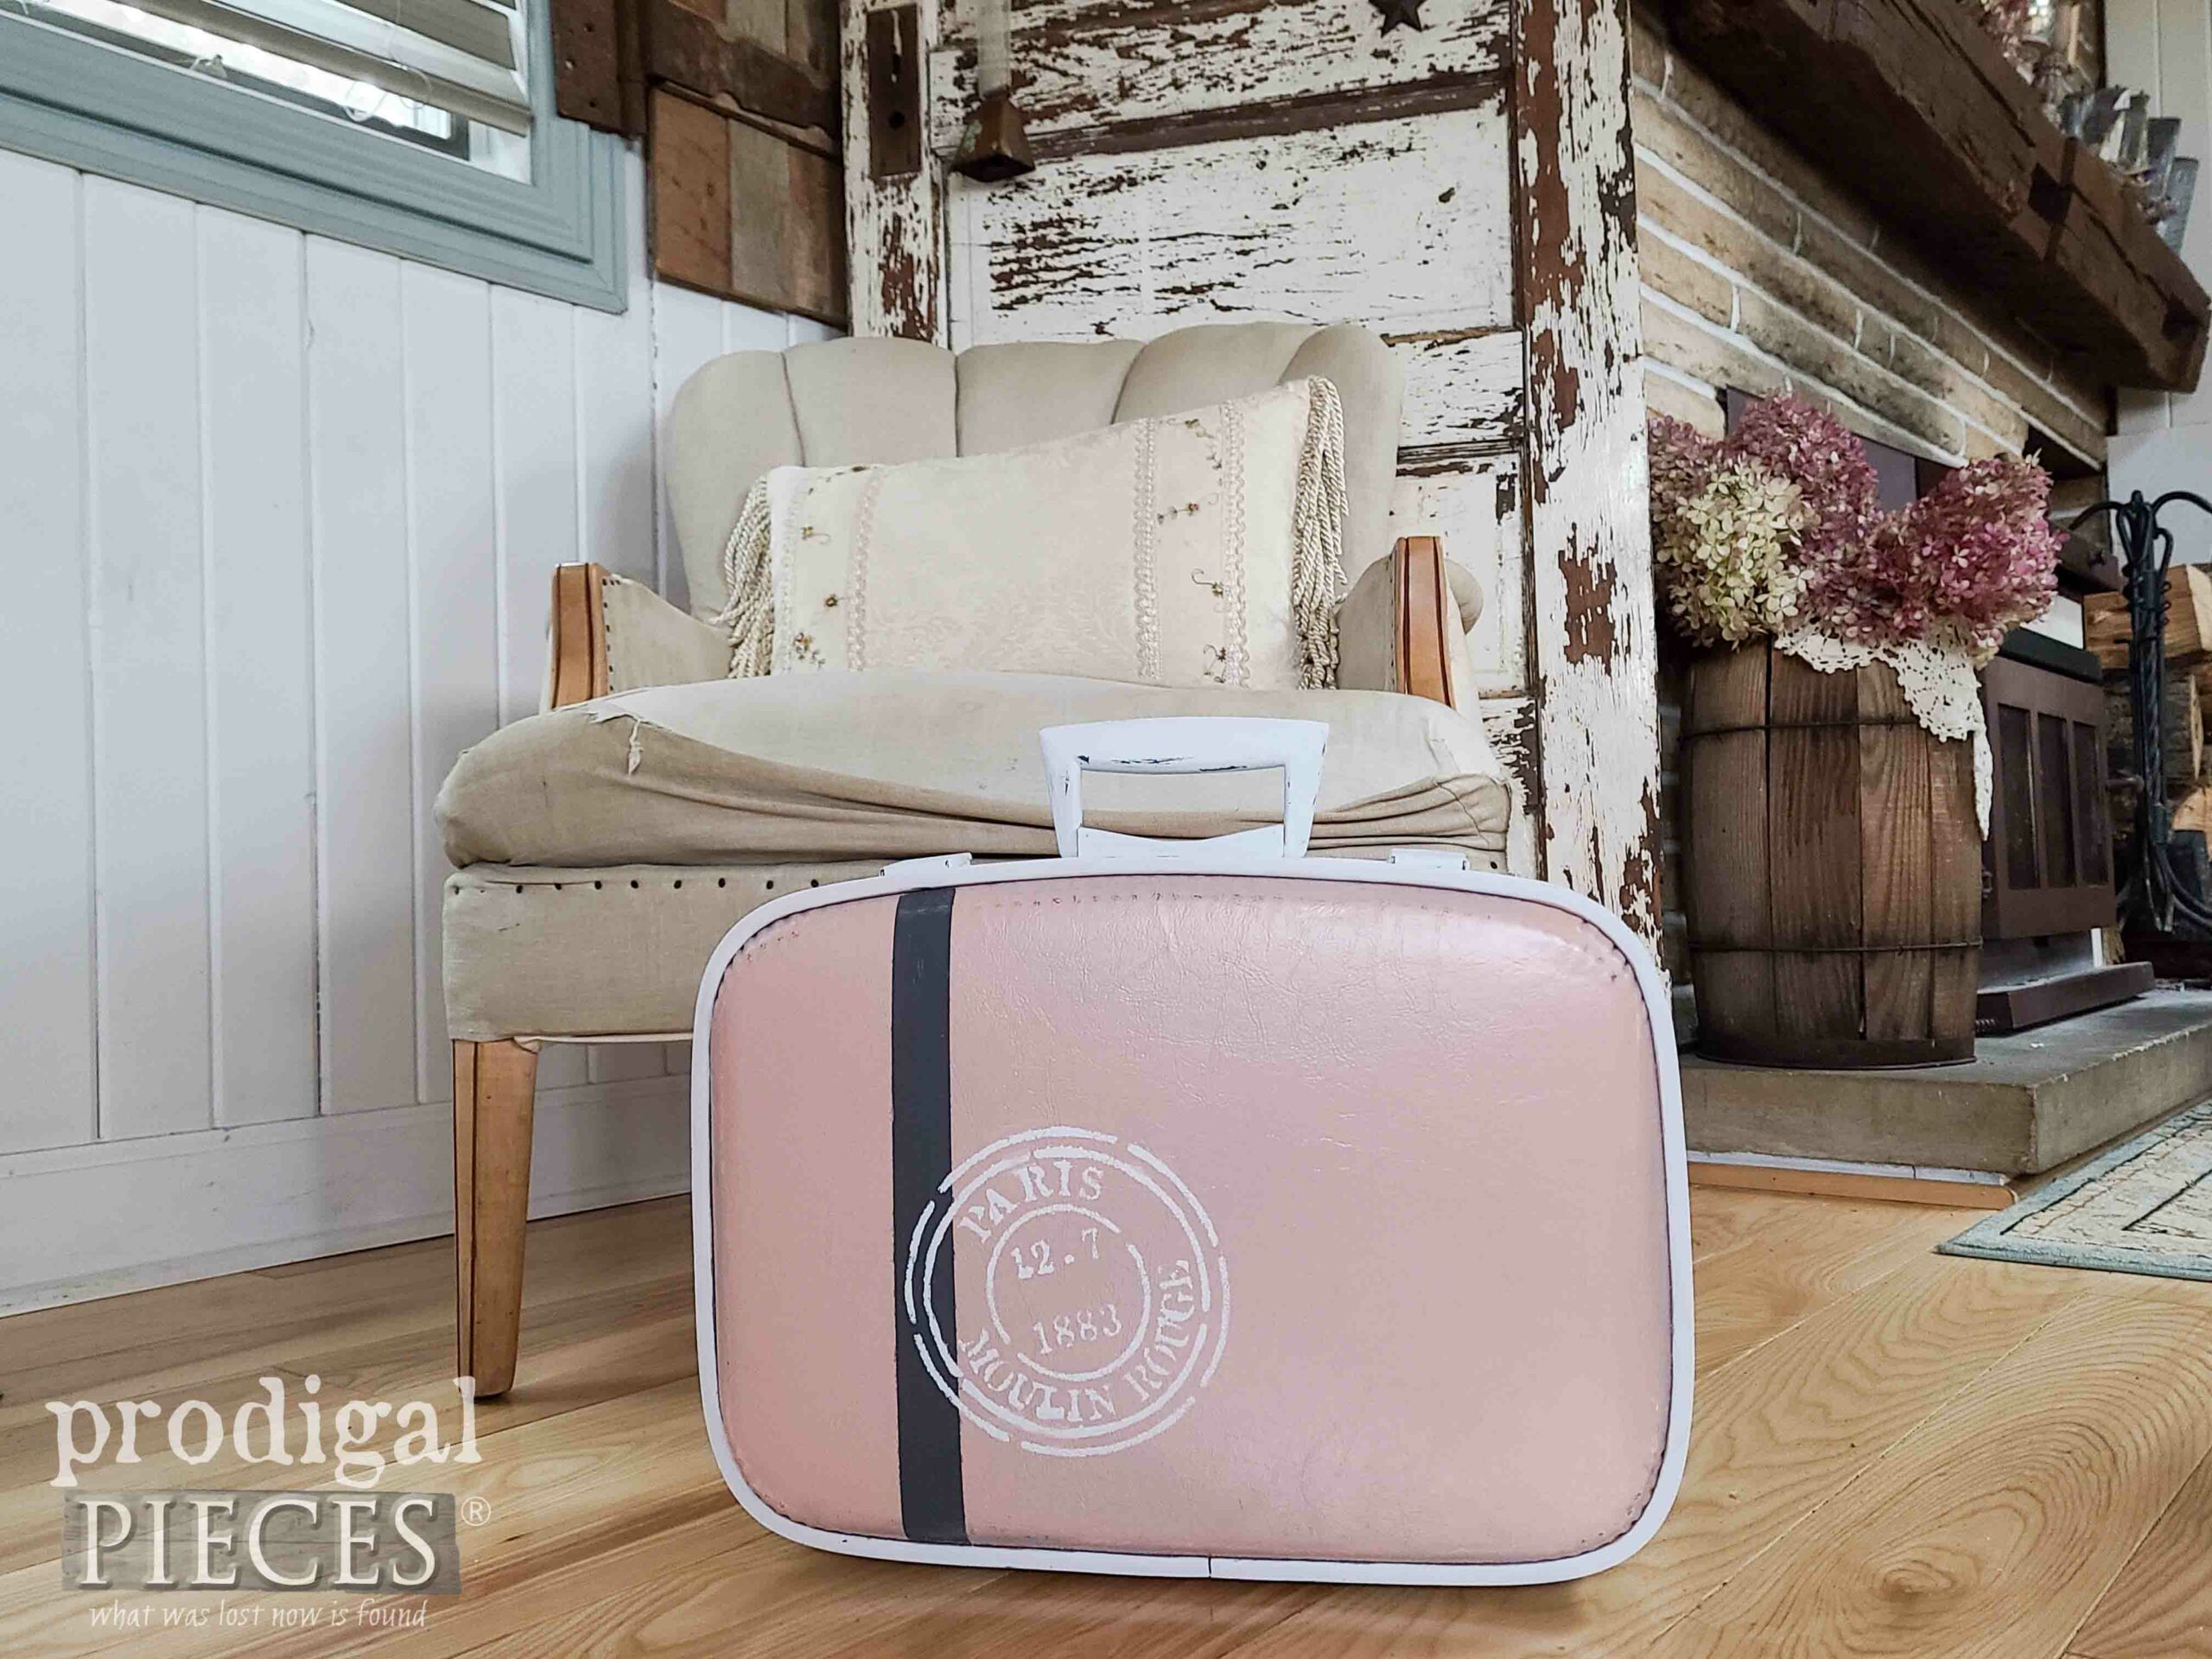 DIY Vintage Luggage Makeover with a Refashioned Shower Curtain | prodigalpieces.com #prodigalpieces